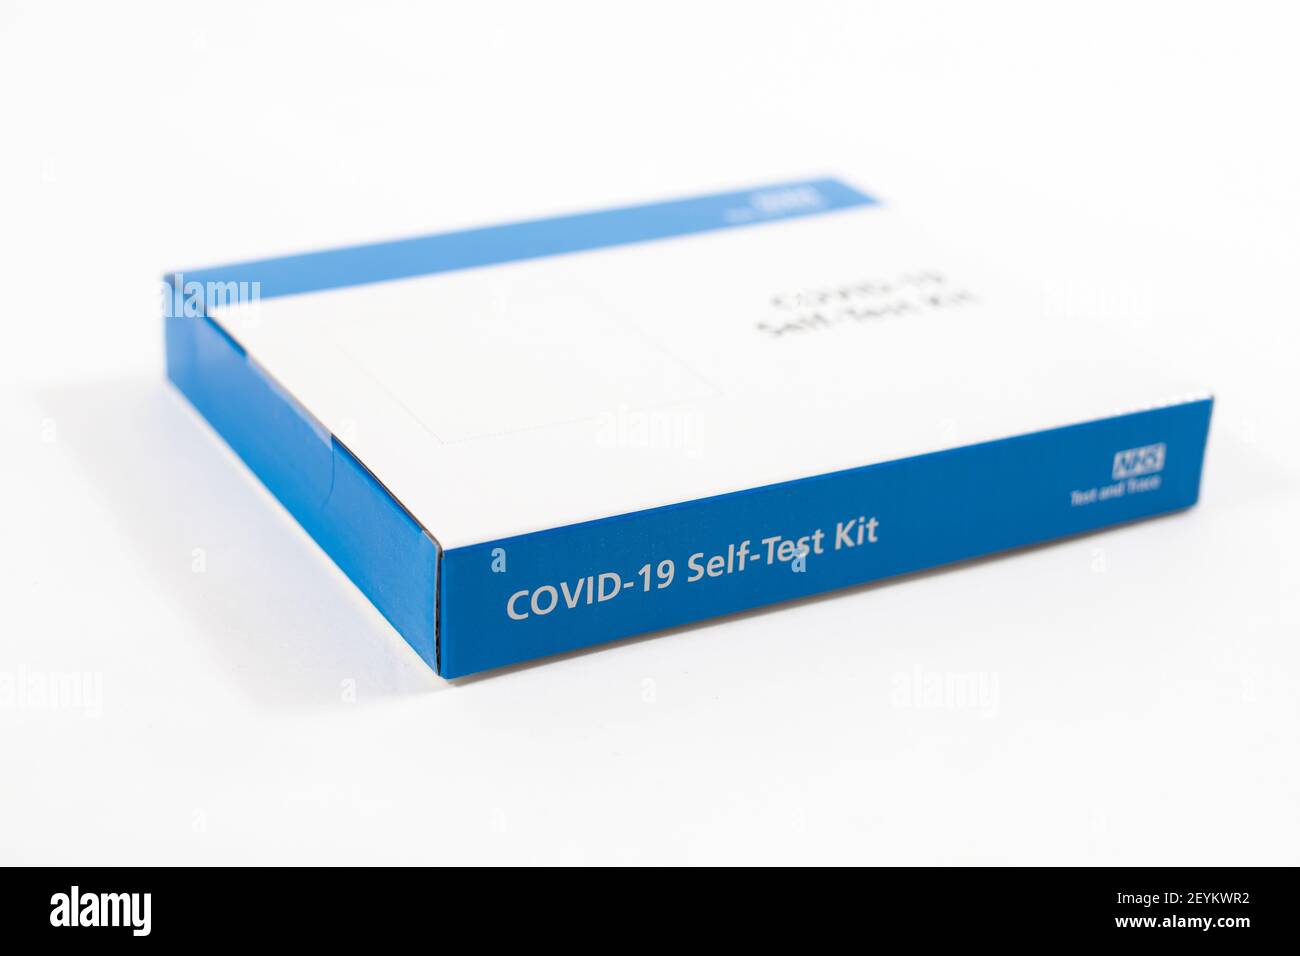 NHS COVID-19 Self-Test Kit on white background. Stock Photo